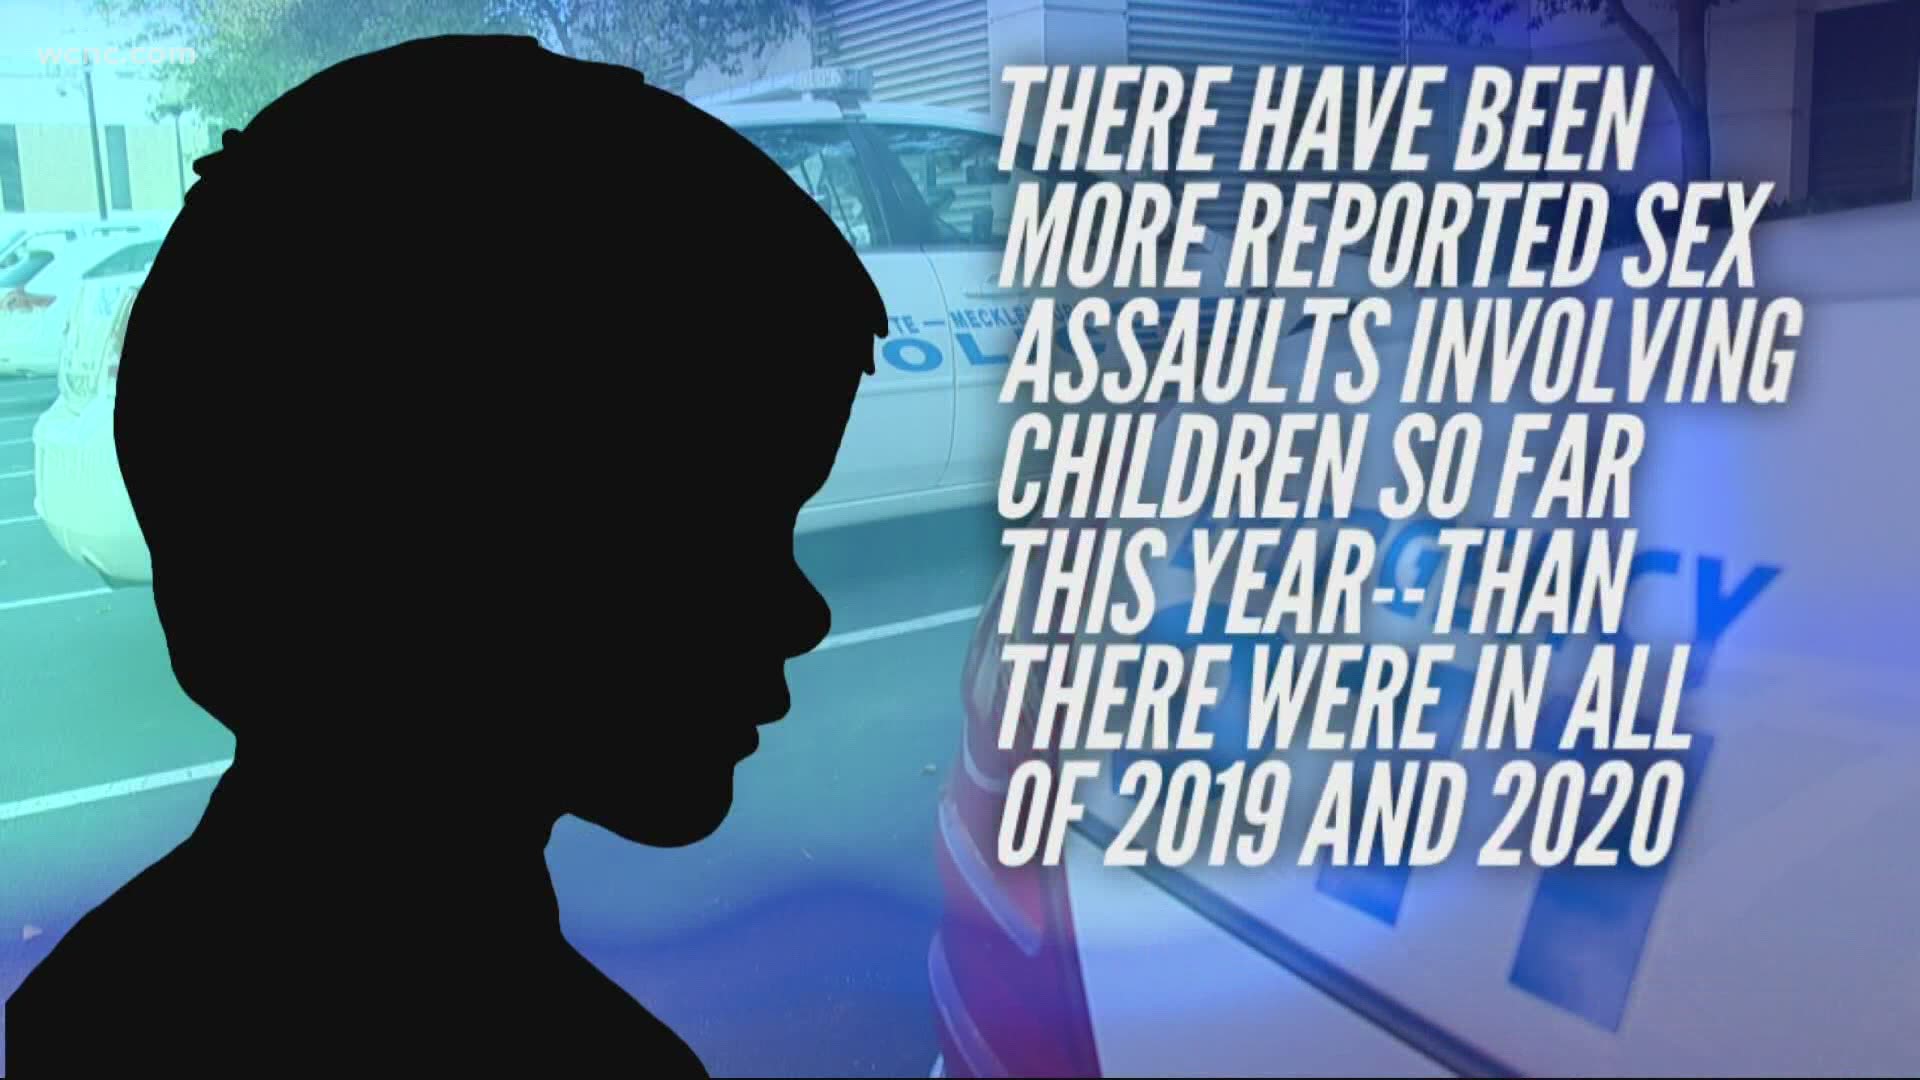 According to CMPD, there have been more reported sex assaults involving children so far in 2021, than there were in all of 2019 and 2020 combined.